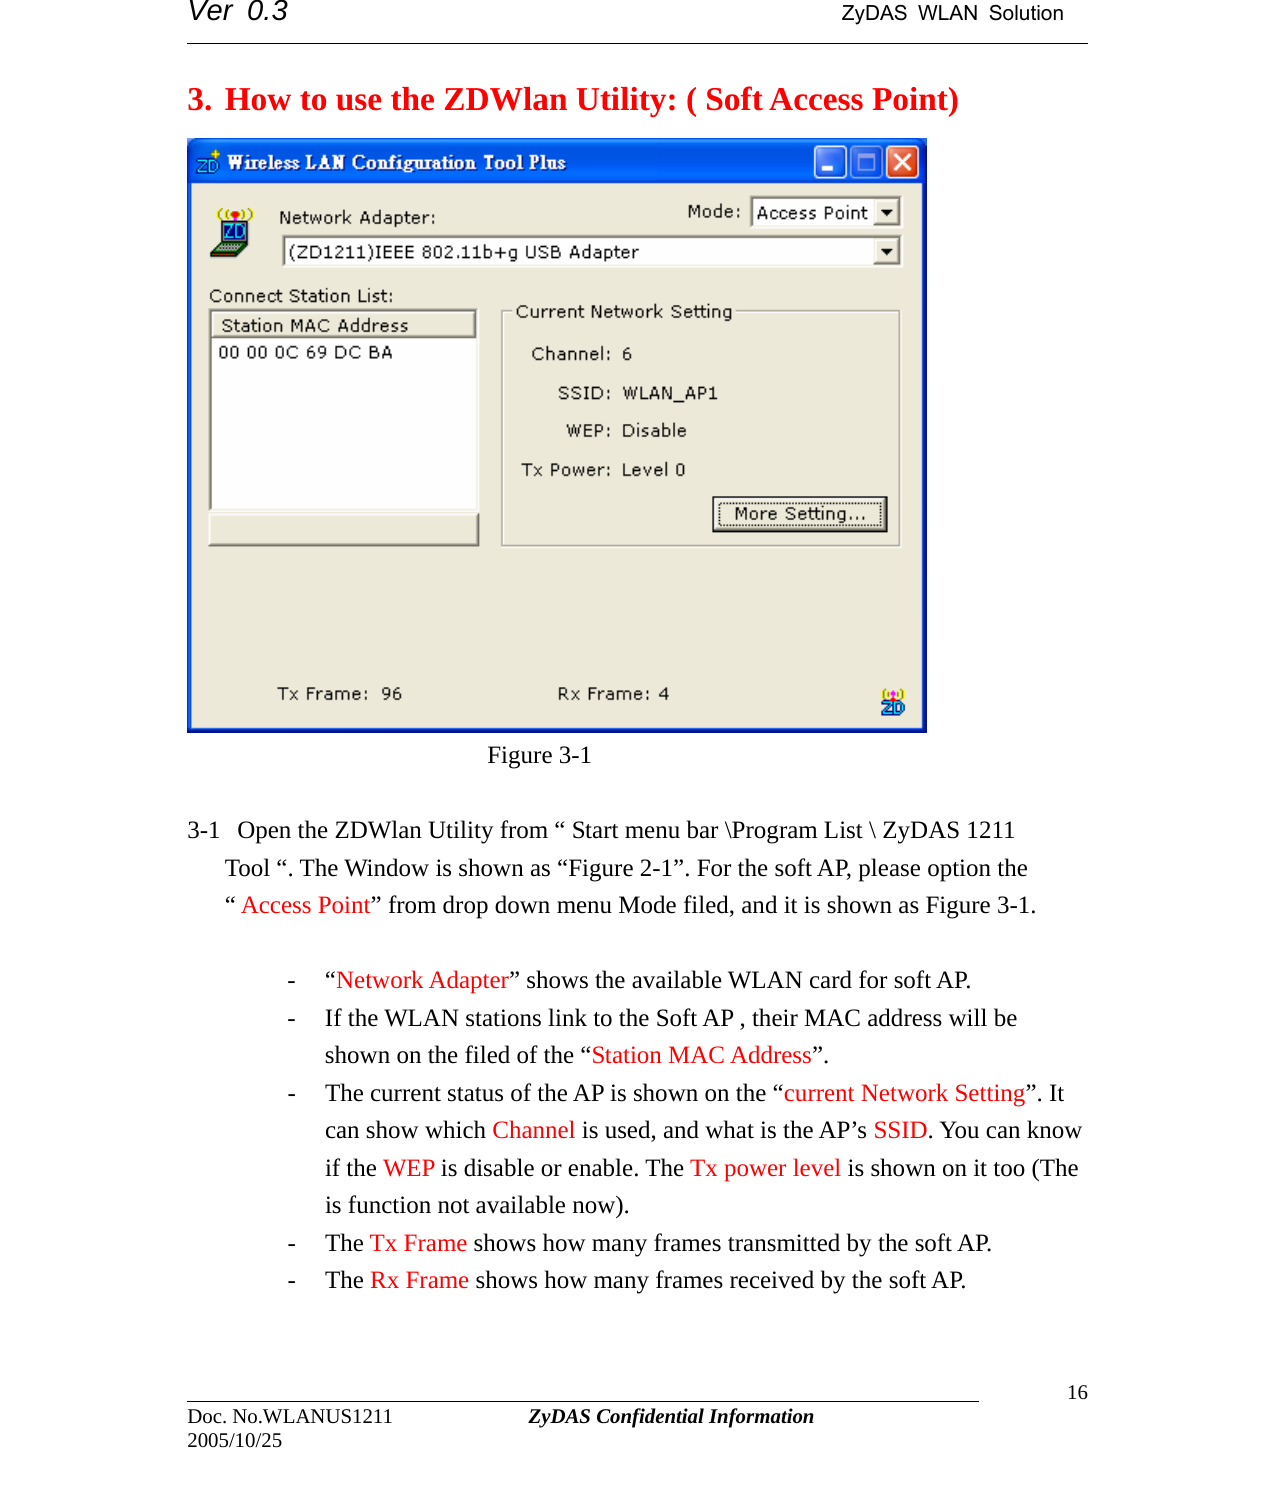 Ver 0.3                                      ZyDAS WLAN Solution                                                                                                                      3. How to use the ZDWlan Utility: ( Soft Access Point)                          Figure 3-1  3-1   Open the ZDWlan Utility from “ Start menu bar \Program List \ ZyDAS 1211           Tool “. The Window is shown as “Figure 2-1”. For the soft AP, please option the “ Access Point” from drop down menu Mode filed, and it is shown as Figure 3-1.  - “Network Adapter” shows the available WLAN card for soft AP. - If the WLAN stations link to the Soft AP , their MAC address will be shown on the filed of the “Station MAC Address”. - The current status of the AP is shown on the “current Network Setting”. It can show which Channel is used, and what is the AP’s SSID. You can know if the WEP is disable or enable. The Tx power level is shown on it too (The is function not available now). - The Tx Frame shows how many frames transmitted by the soft AP.                                                                                Doc. No.WLANUS1211             ZyDAS Confidential Information                   16 2005/10/25 - The Rx Frame shows how many frames received by the soft AP. 